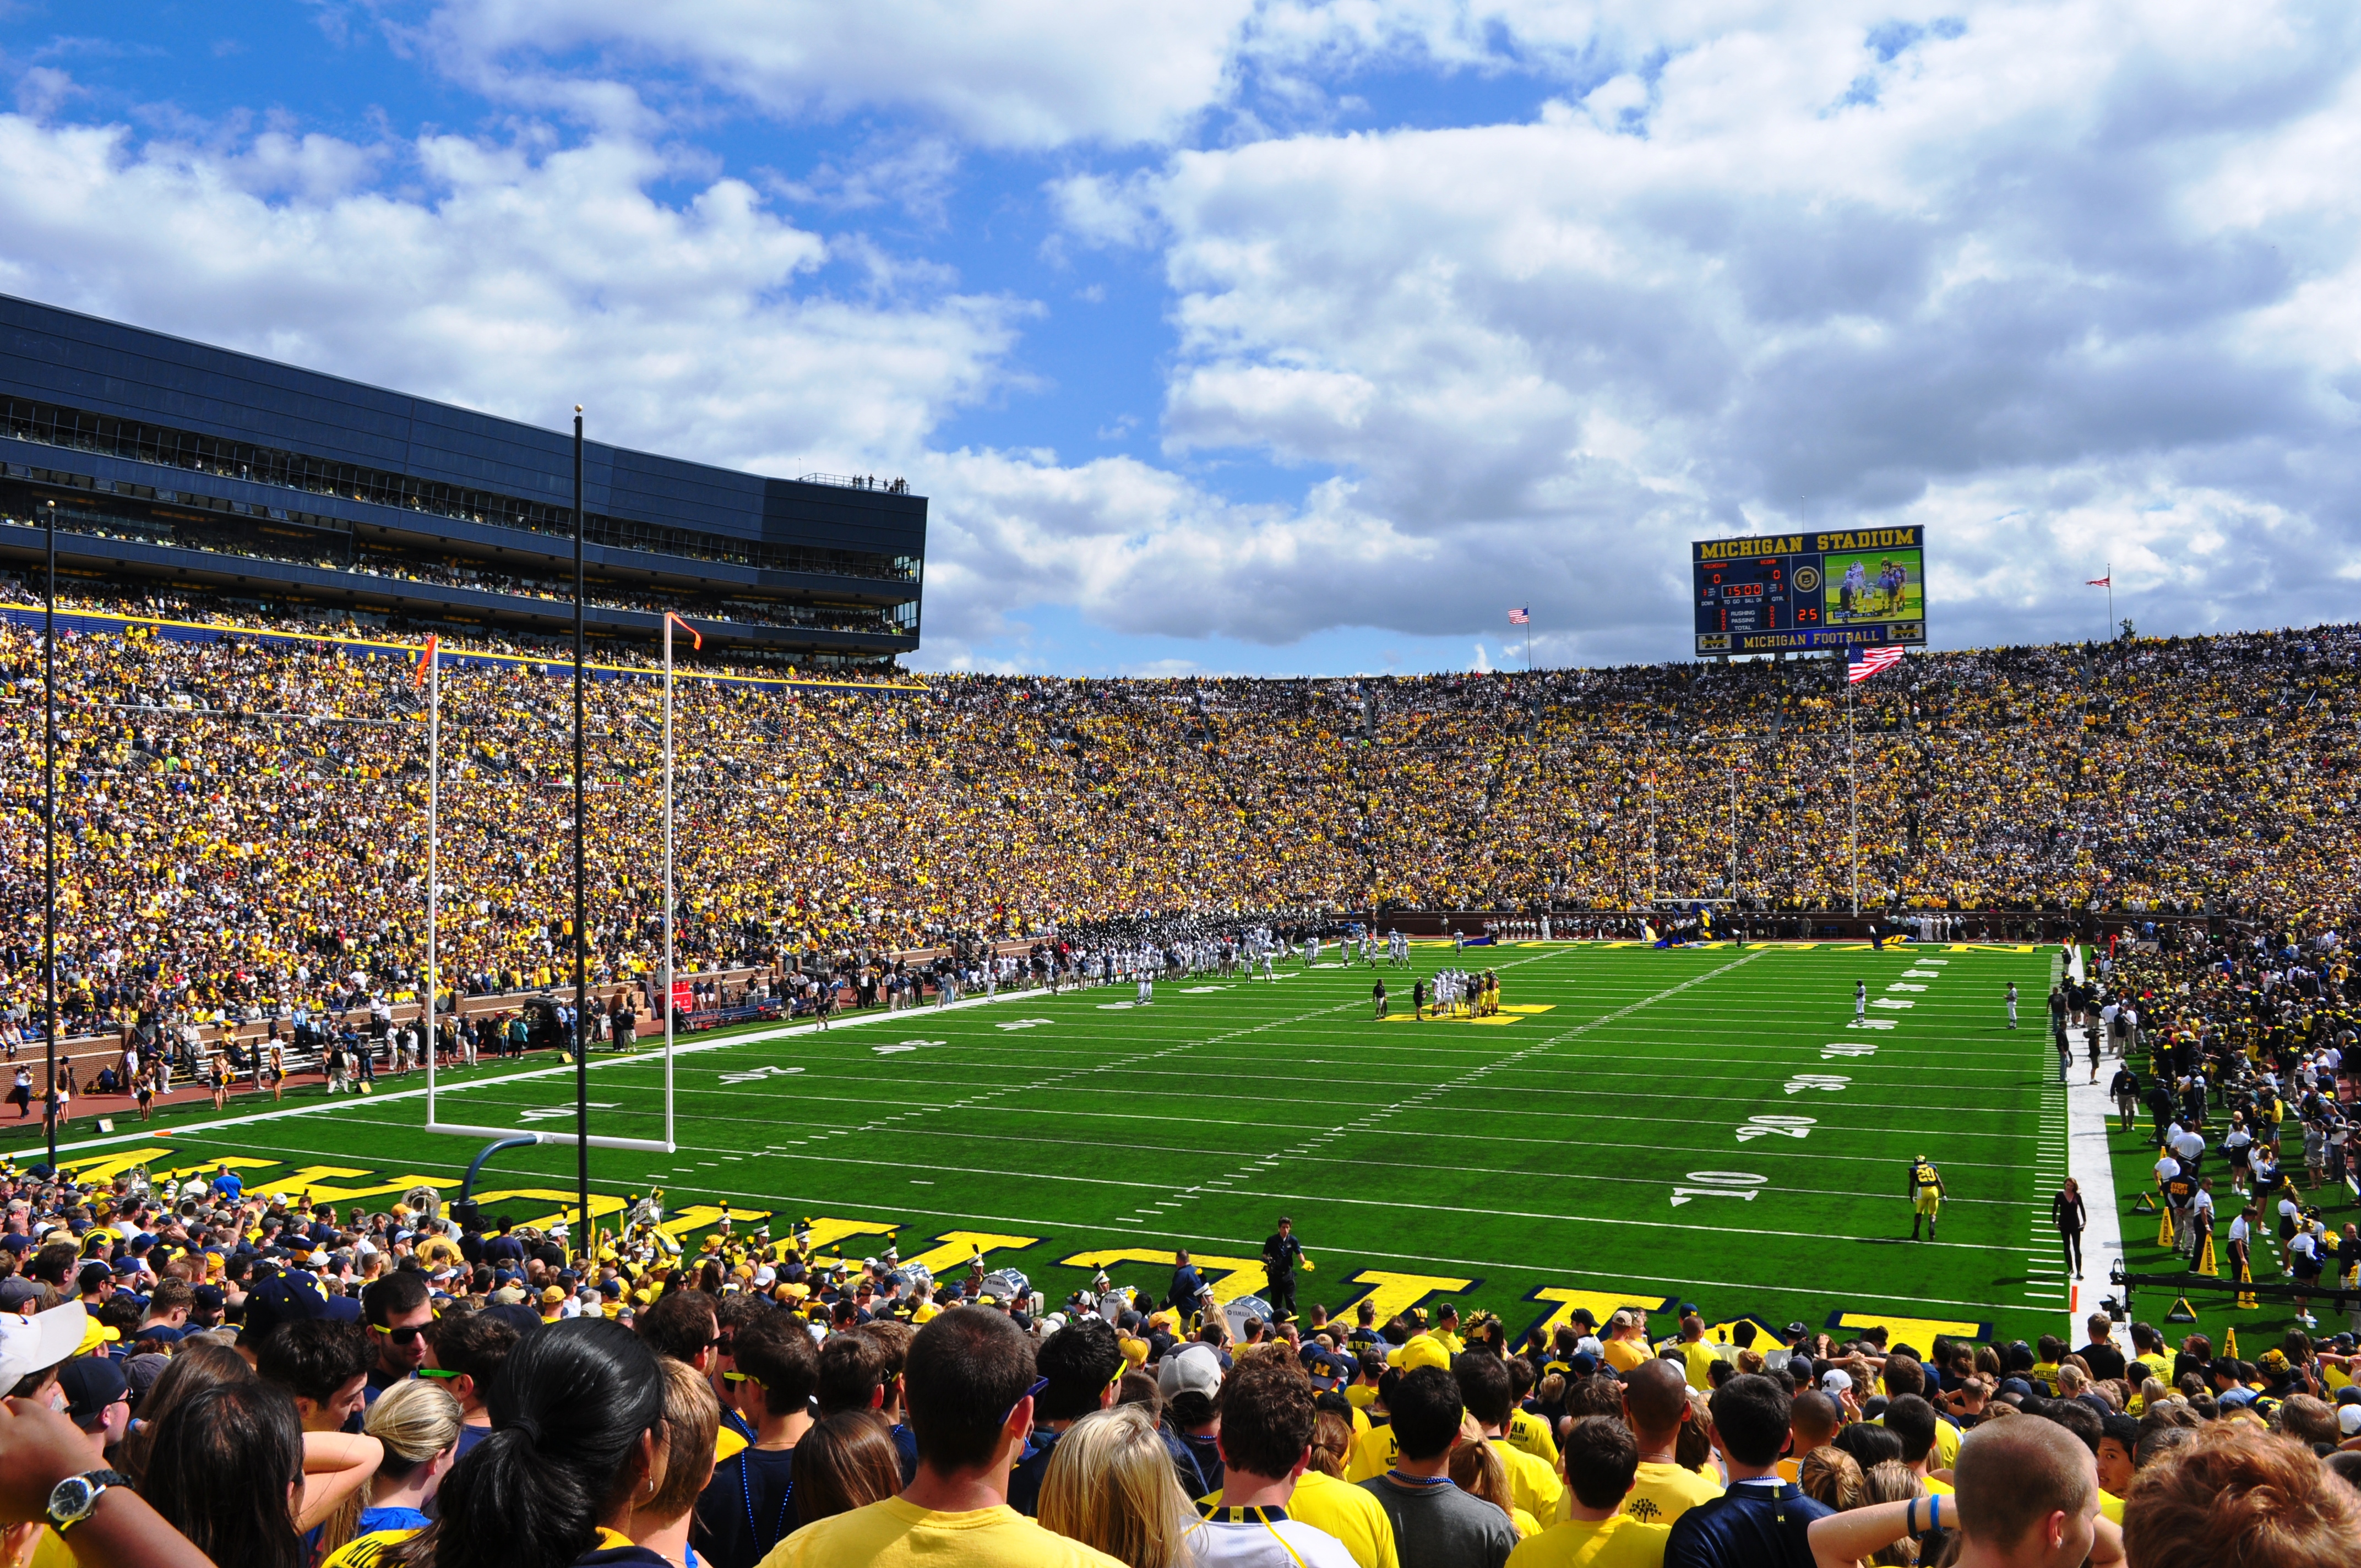 A 2010 football game at the University of Michigan's stadium.